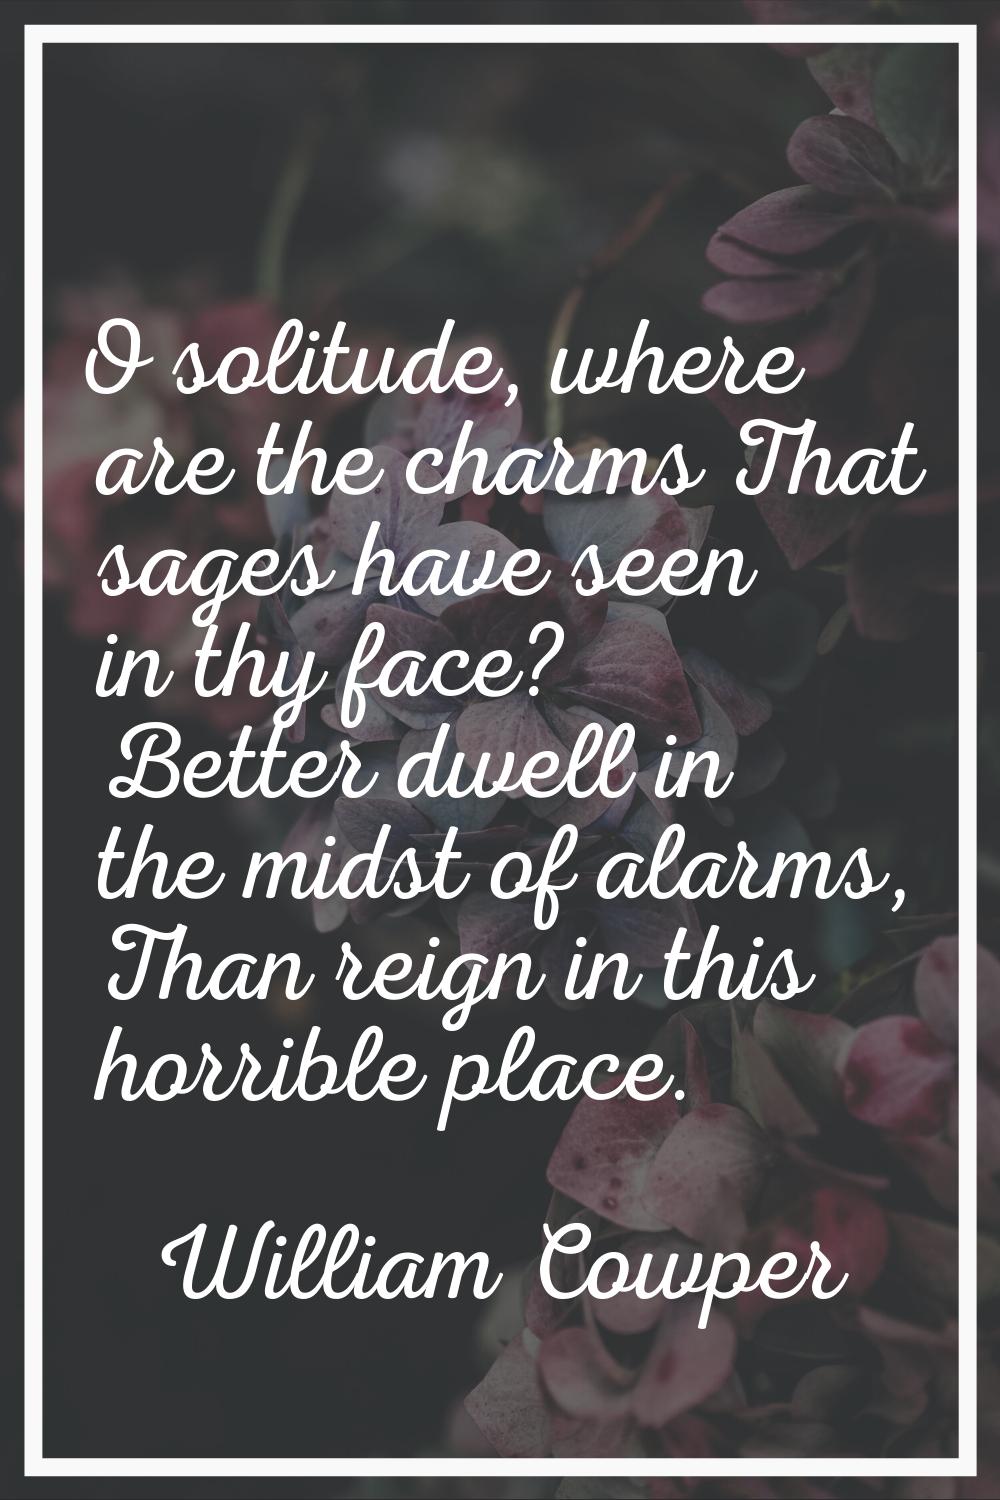 O solitude, where are the charms That sages have seen in thy face? Better dwell in the midst of ala